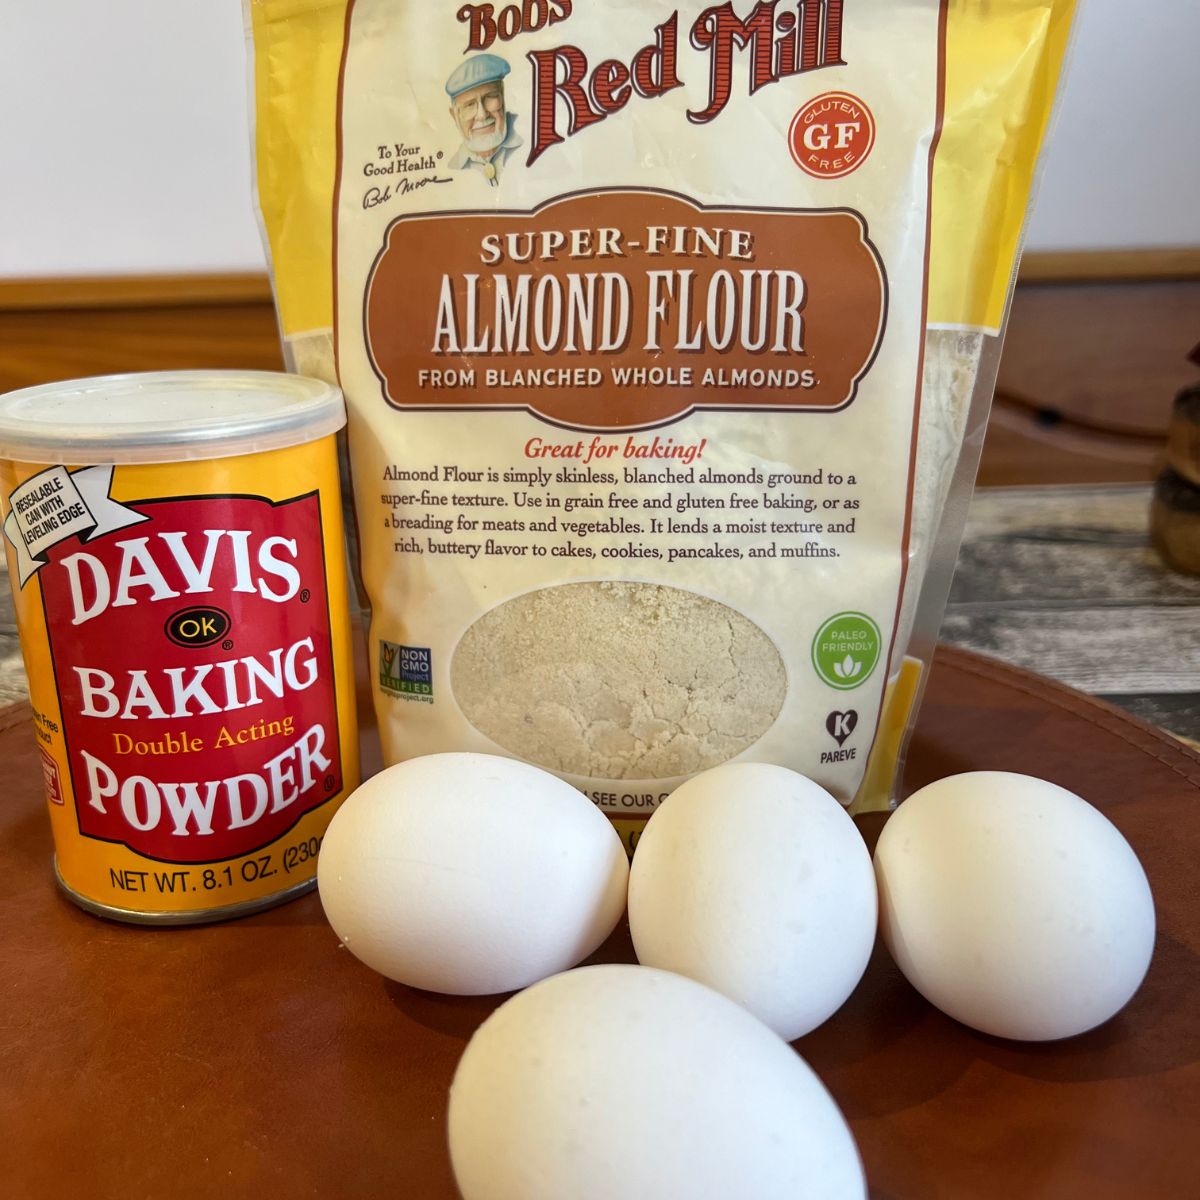 4 eggs, a bag of almond flour and a jar of baking powder on a table